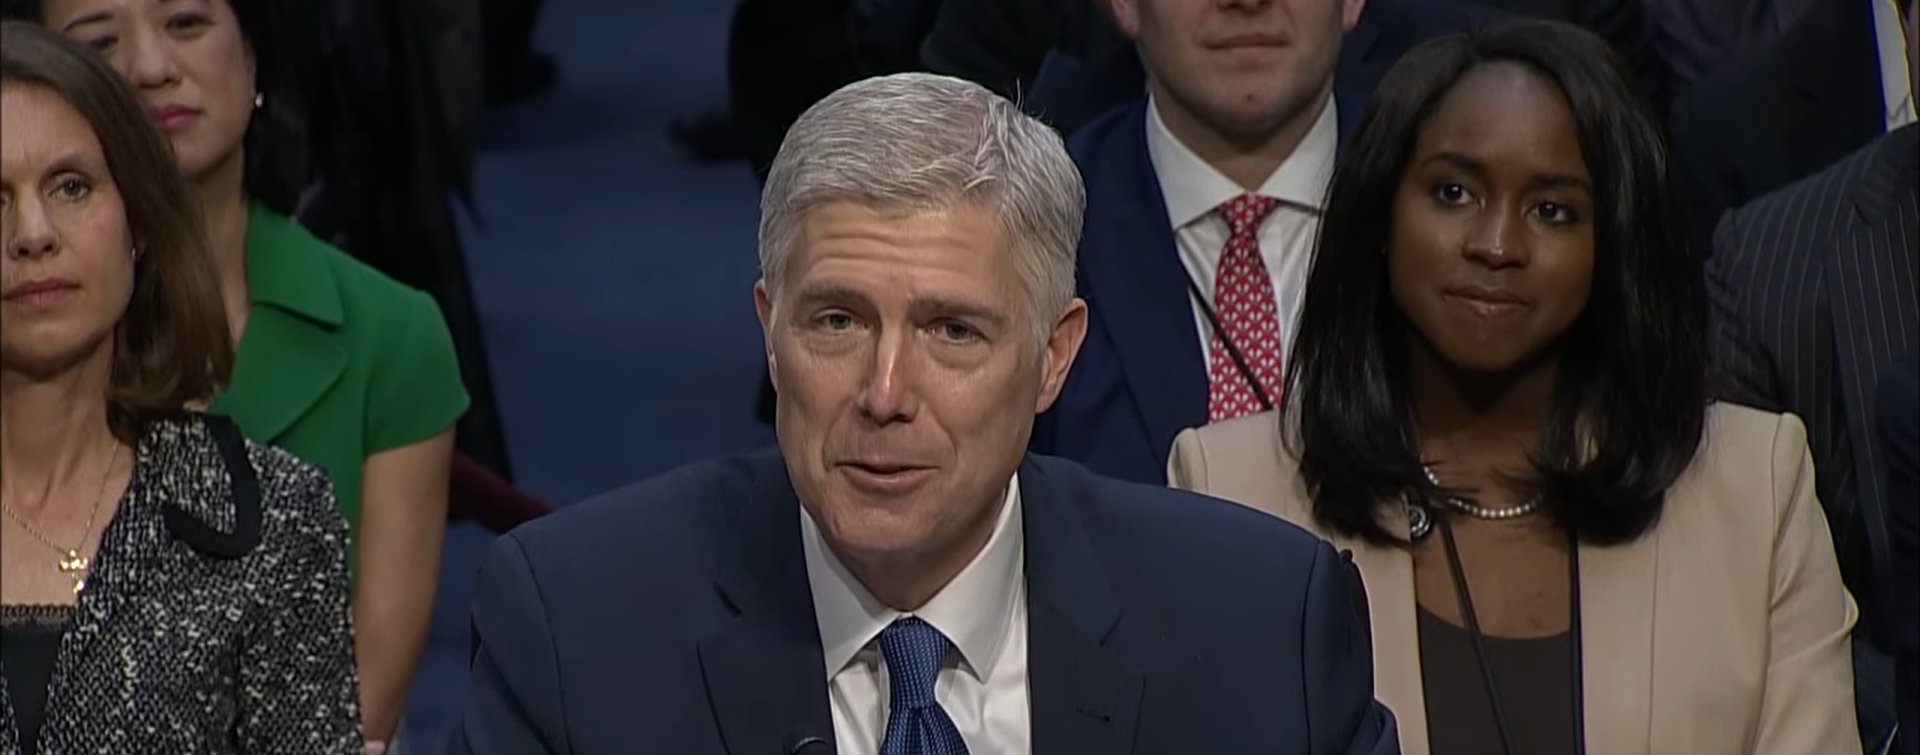 Judge Neil Gorsuch Disapproves of King Resistance Ruling in a Courtroom